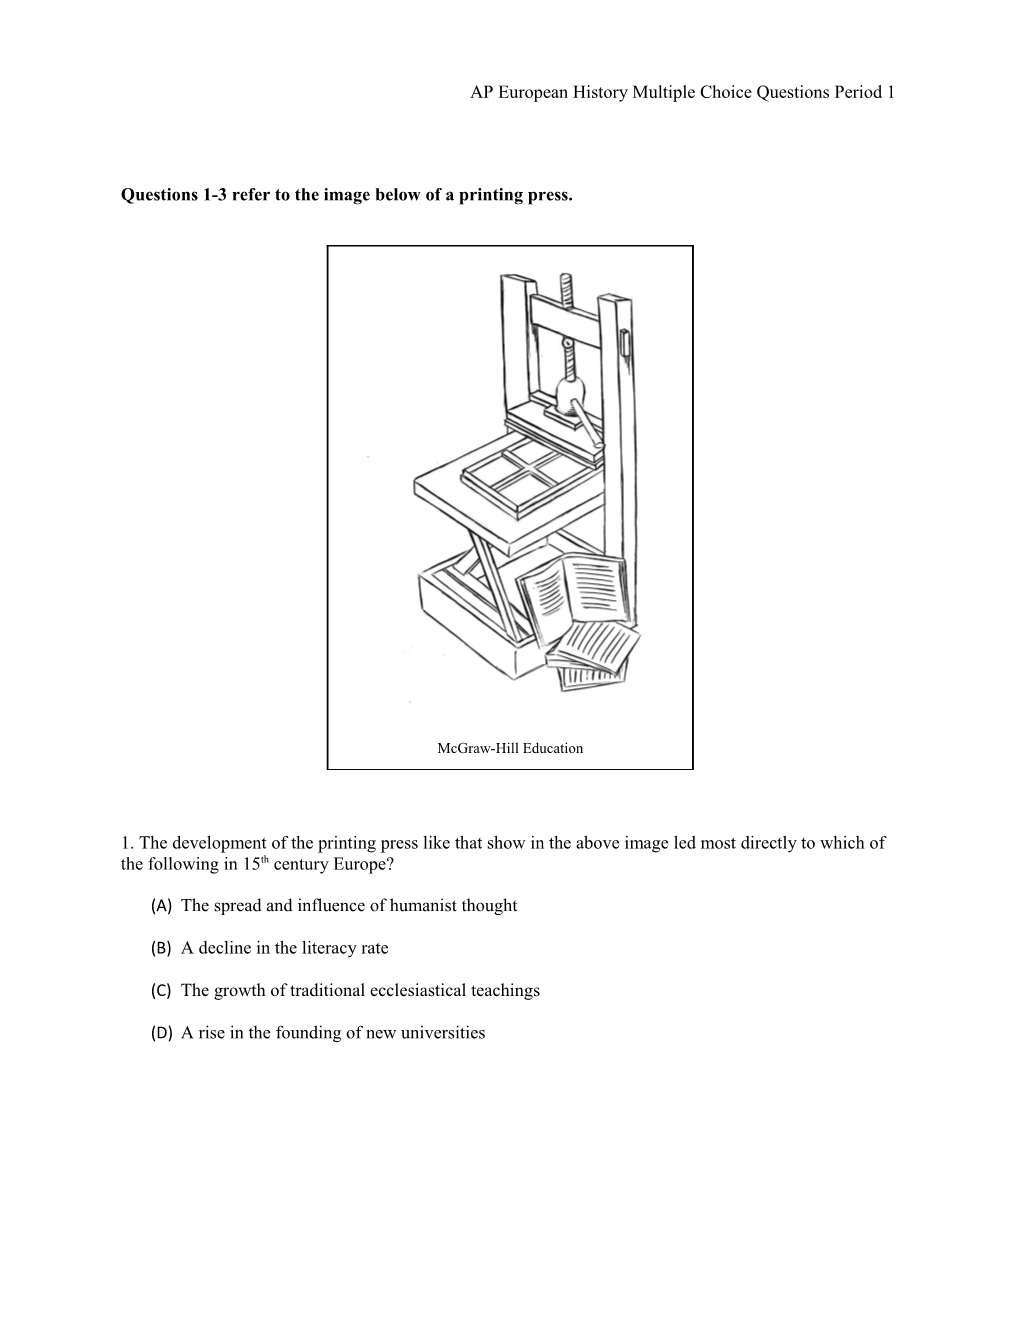 Questions 1-3 Refer to the Image Below of a Printing Press